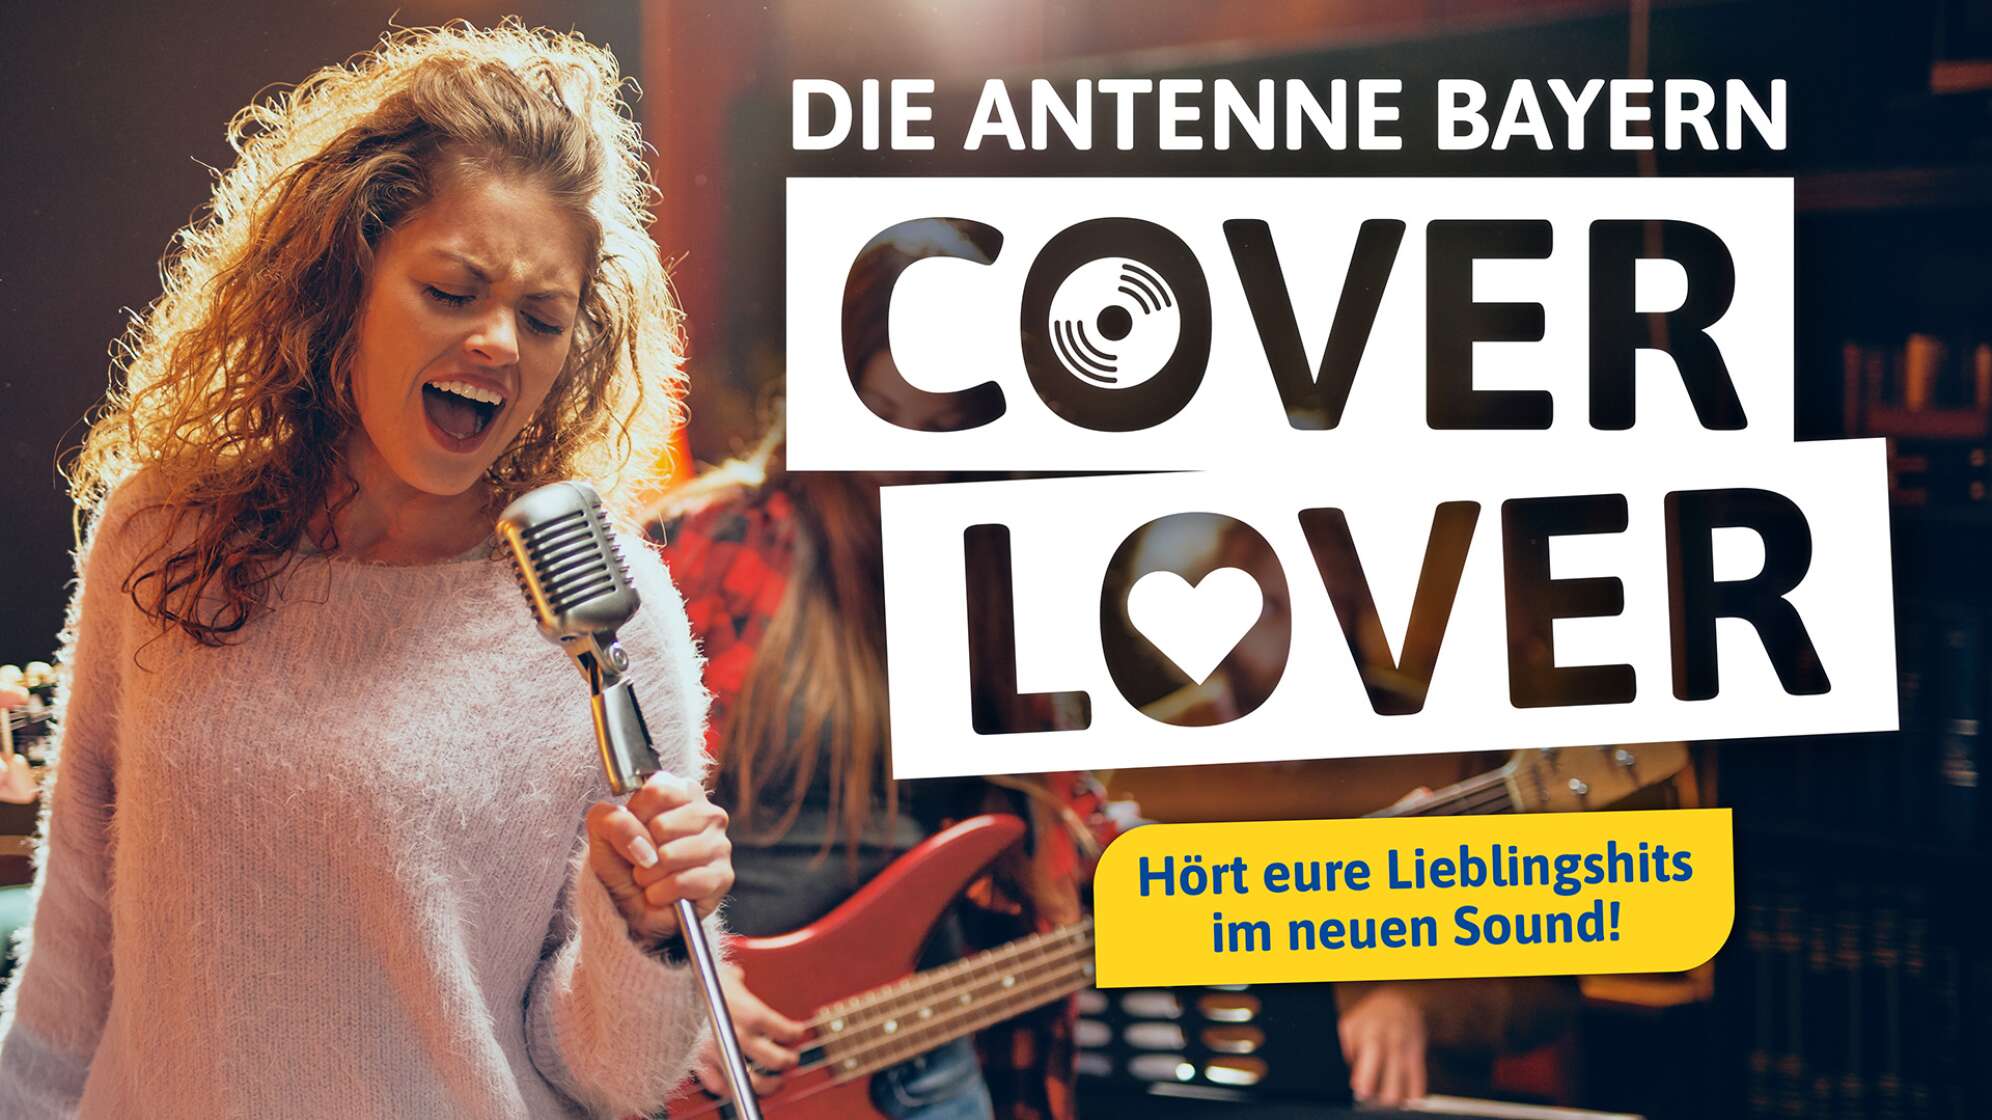 Die ANTENNE BAYERN Cover Lover